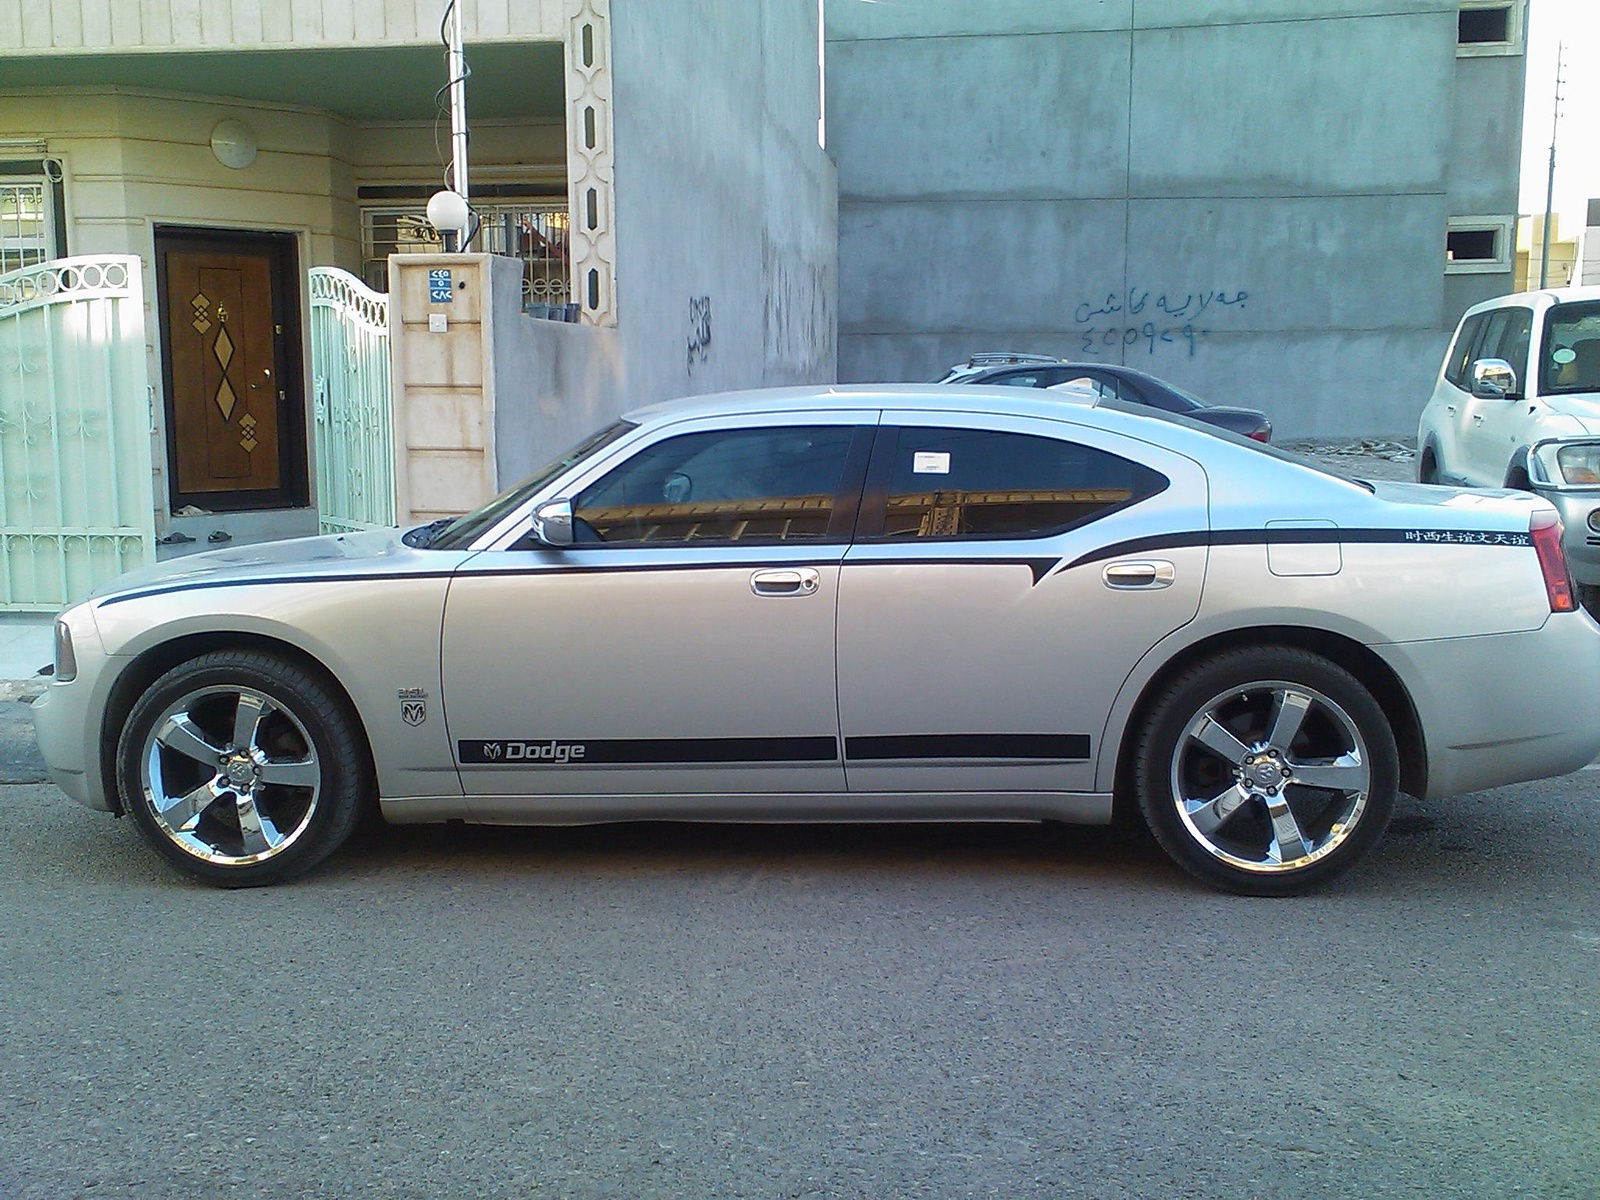 2007 Dodge Charger SE picture, exterior